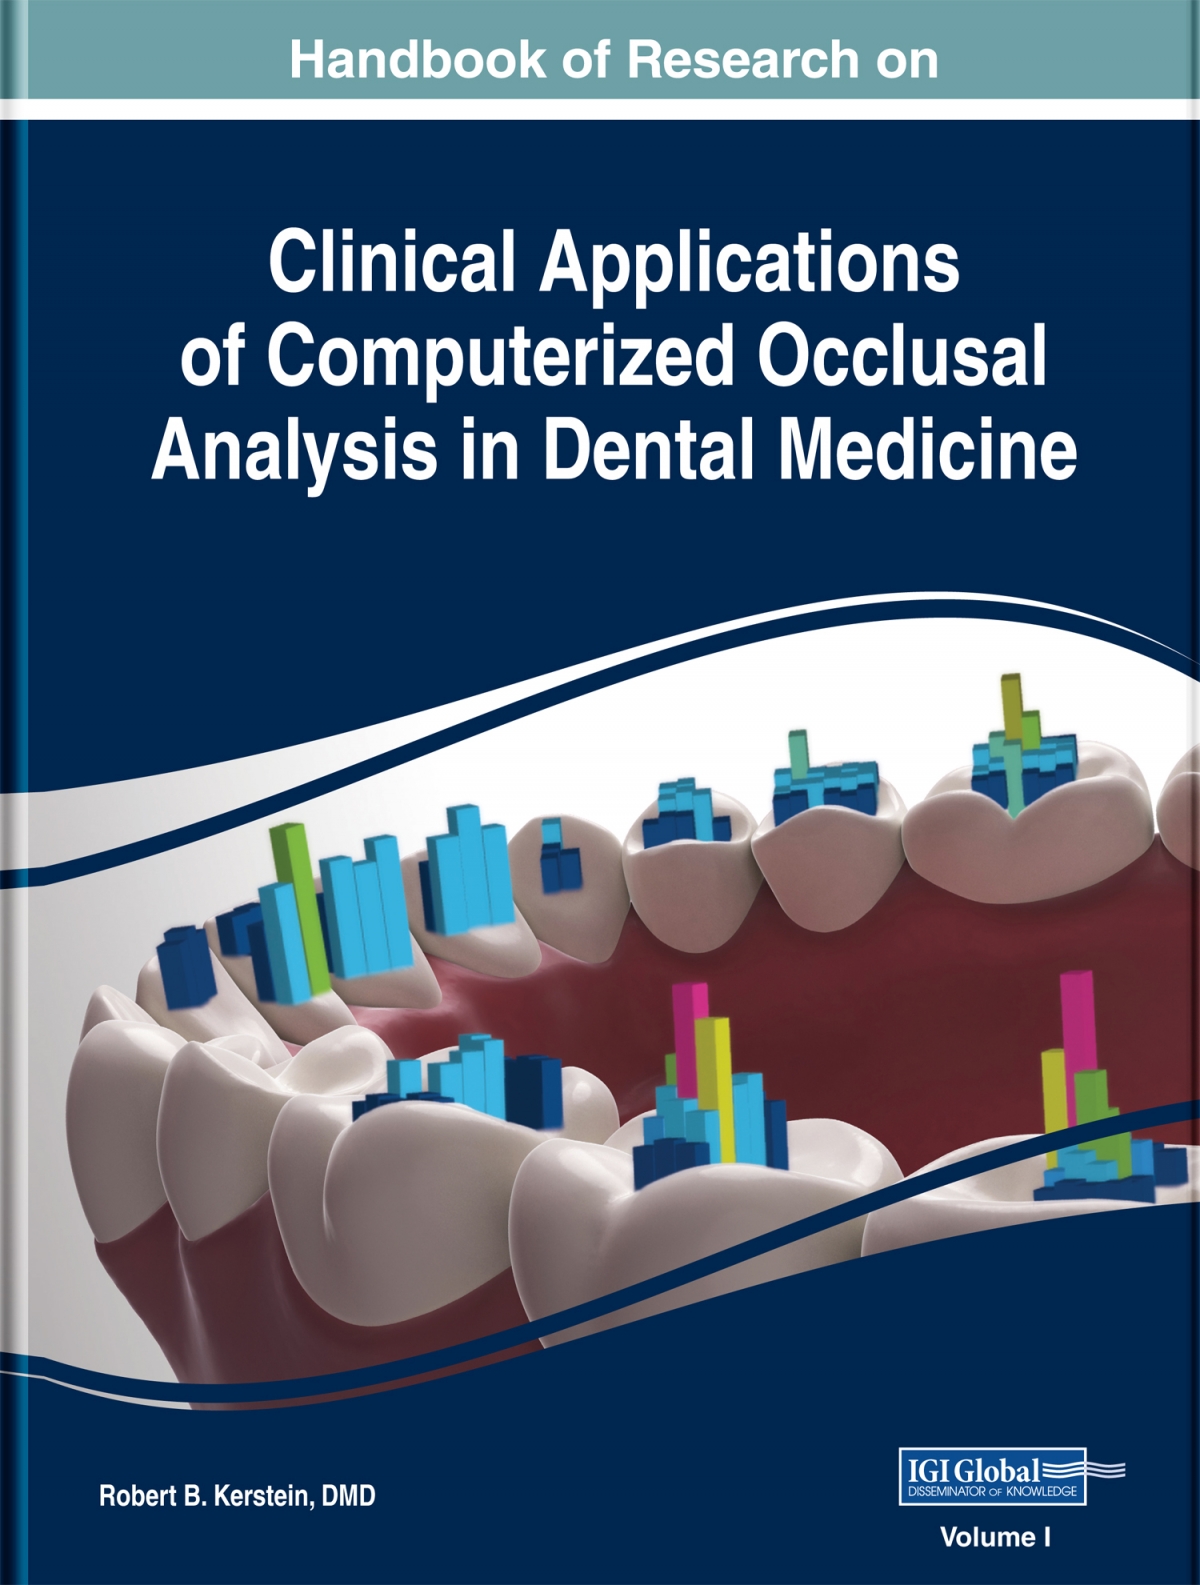 This three-volume handbook provides further validation with real-world cases covering the importance of using digital occlusal technology as part of a dentist's everyday treatment toolkit.